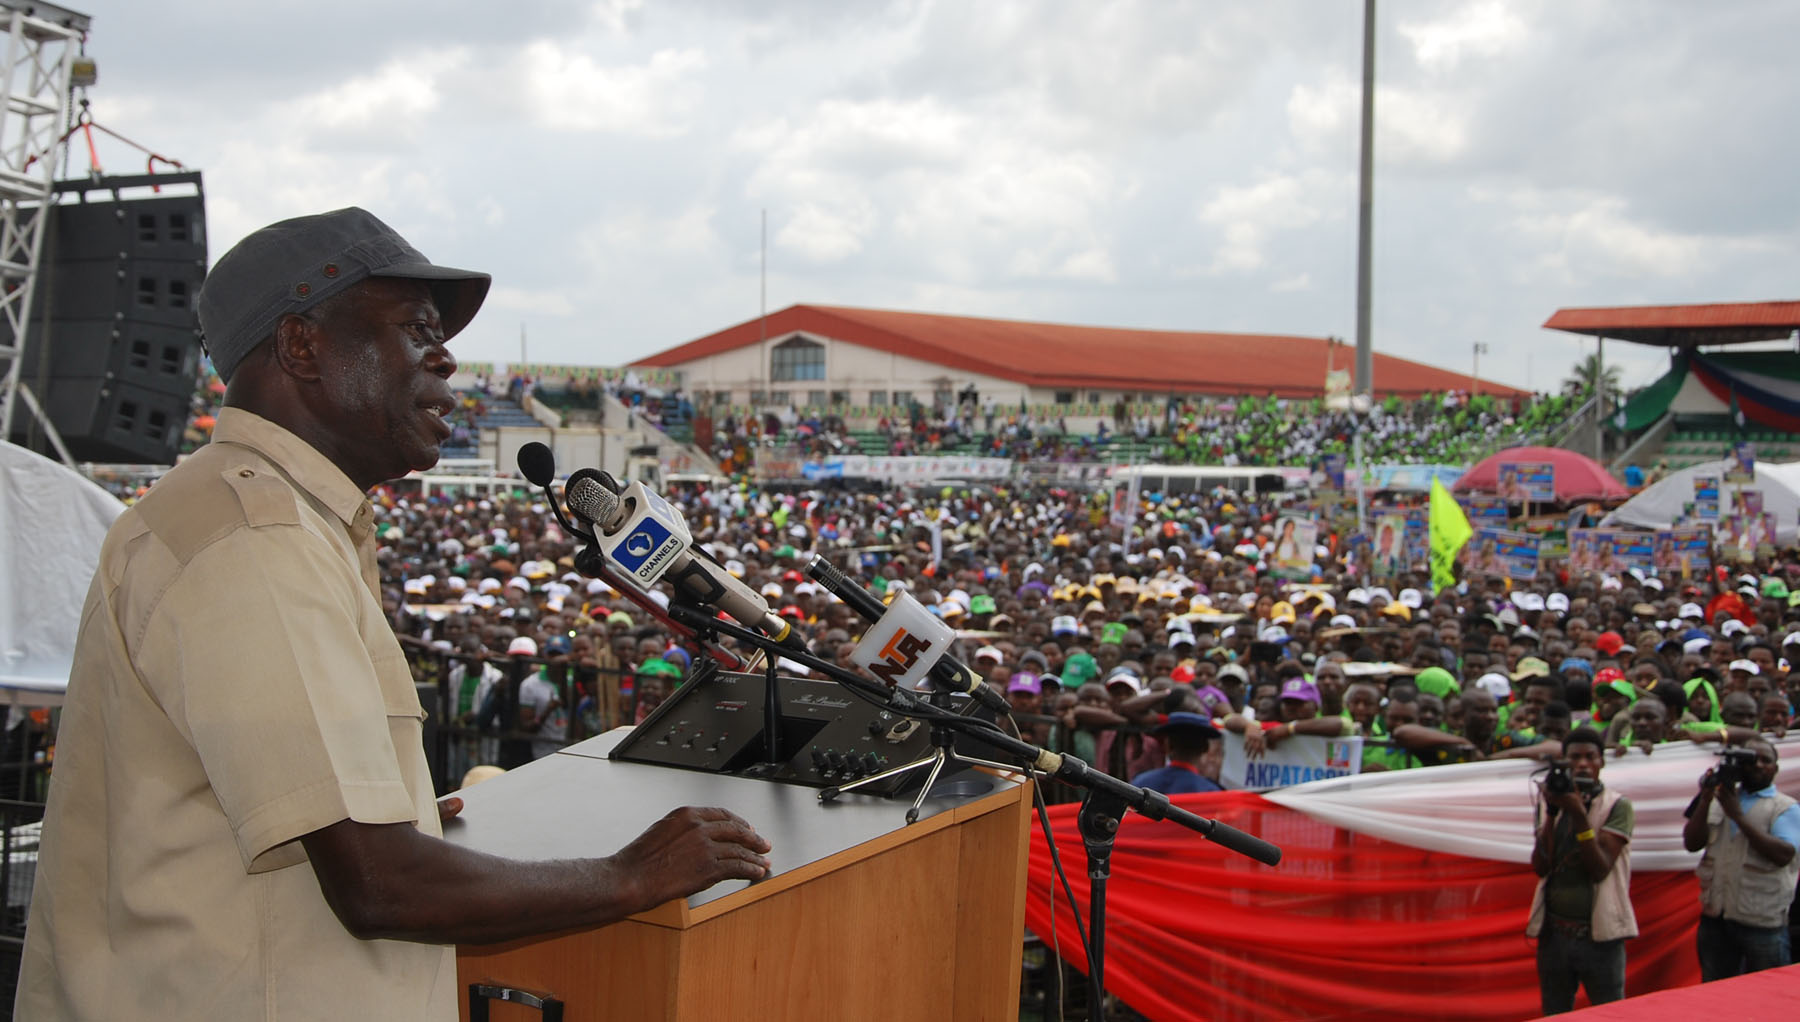 Governor Adams Oshiomhole addressses the crowd at the Samuel Ogbemudia Stadium during the celebration of the 6th Anniversary of the administration of Governor Adams Oshiomhole in Benin City, Edo State,Wednesday.